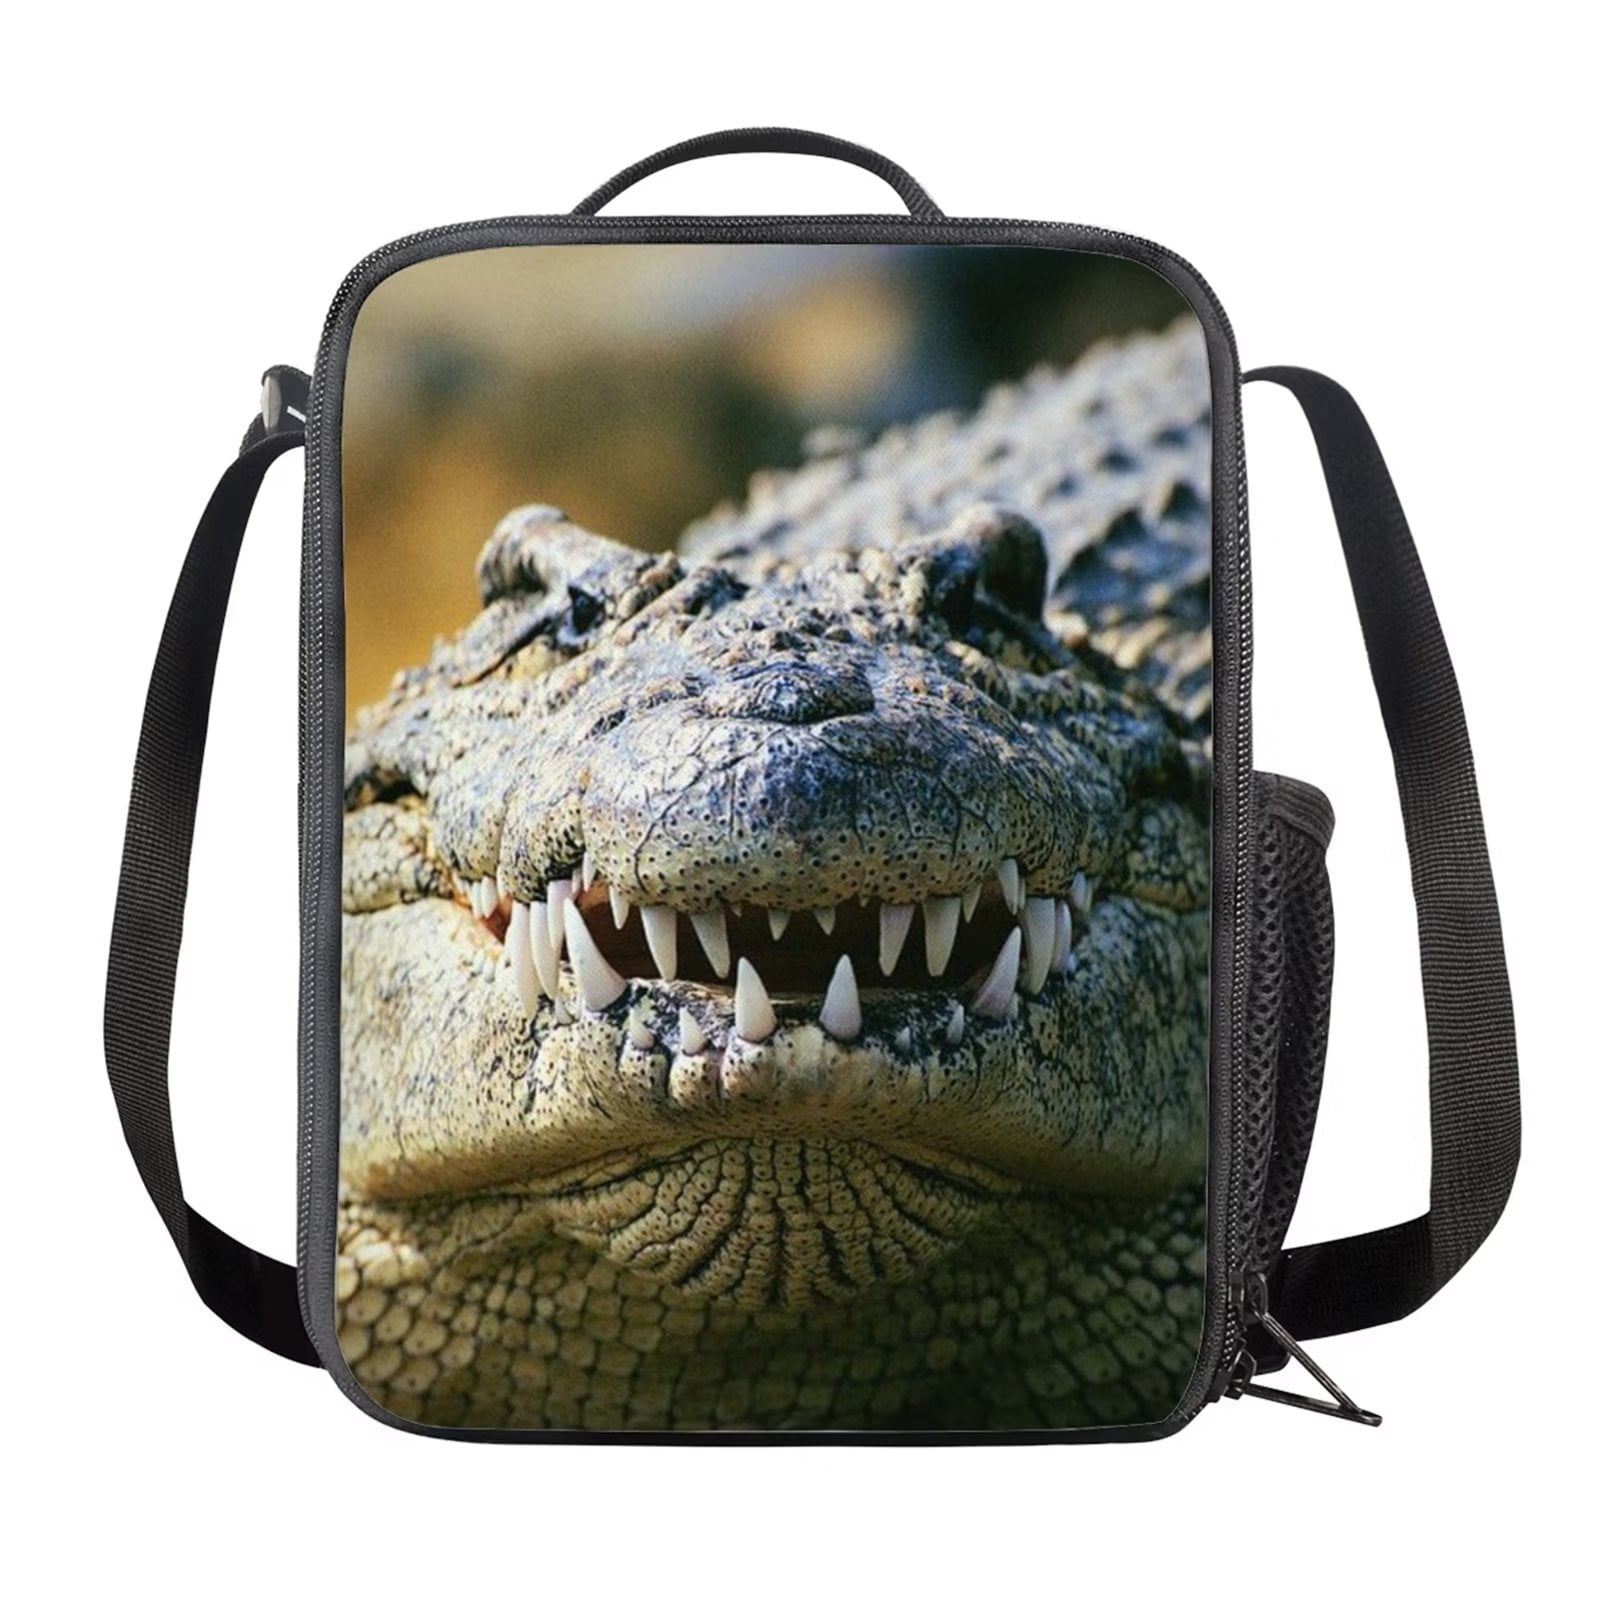  Alligator Crocodile Green Lunch Bags for Boys Girls Insulated  Small Cooler Lunch Box Toddler Lunchbox School Office Women Tote Lunchbags:  Home & Kitchen